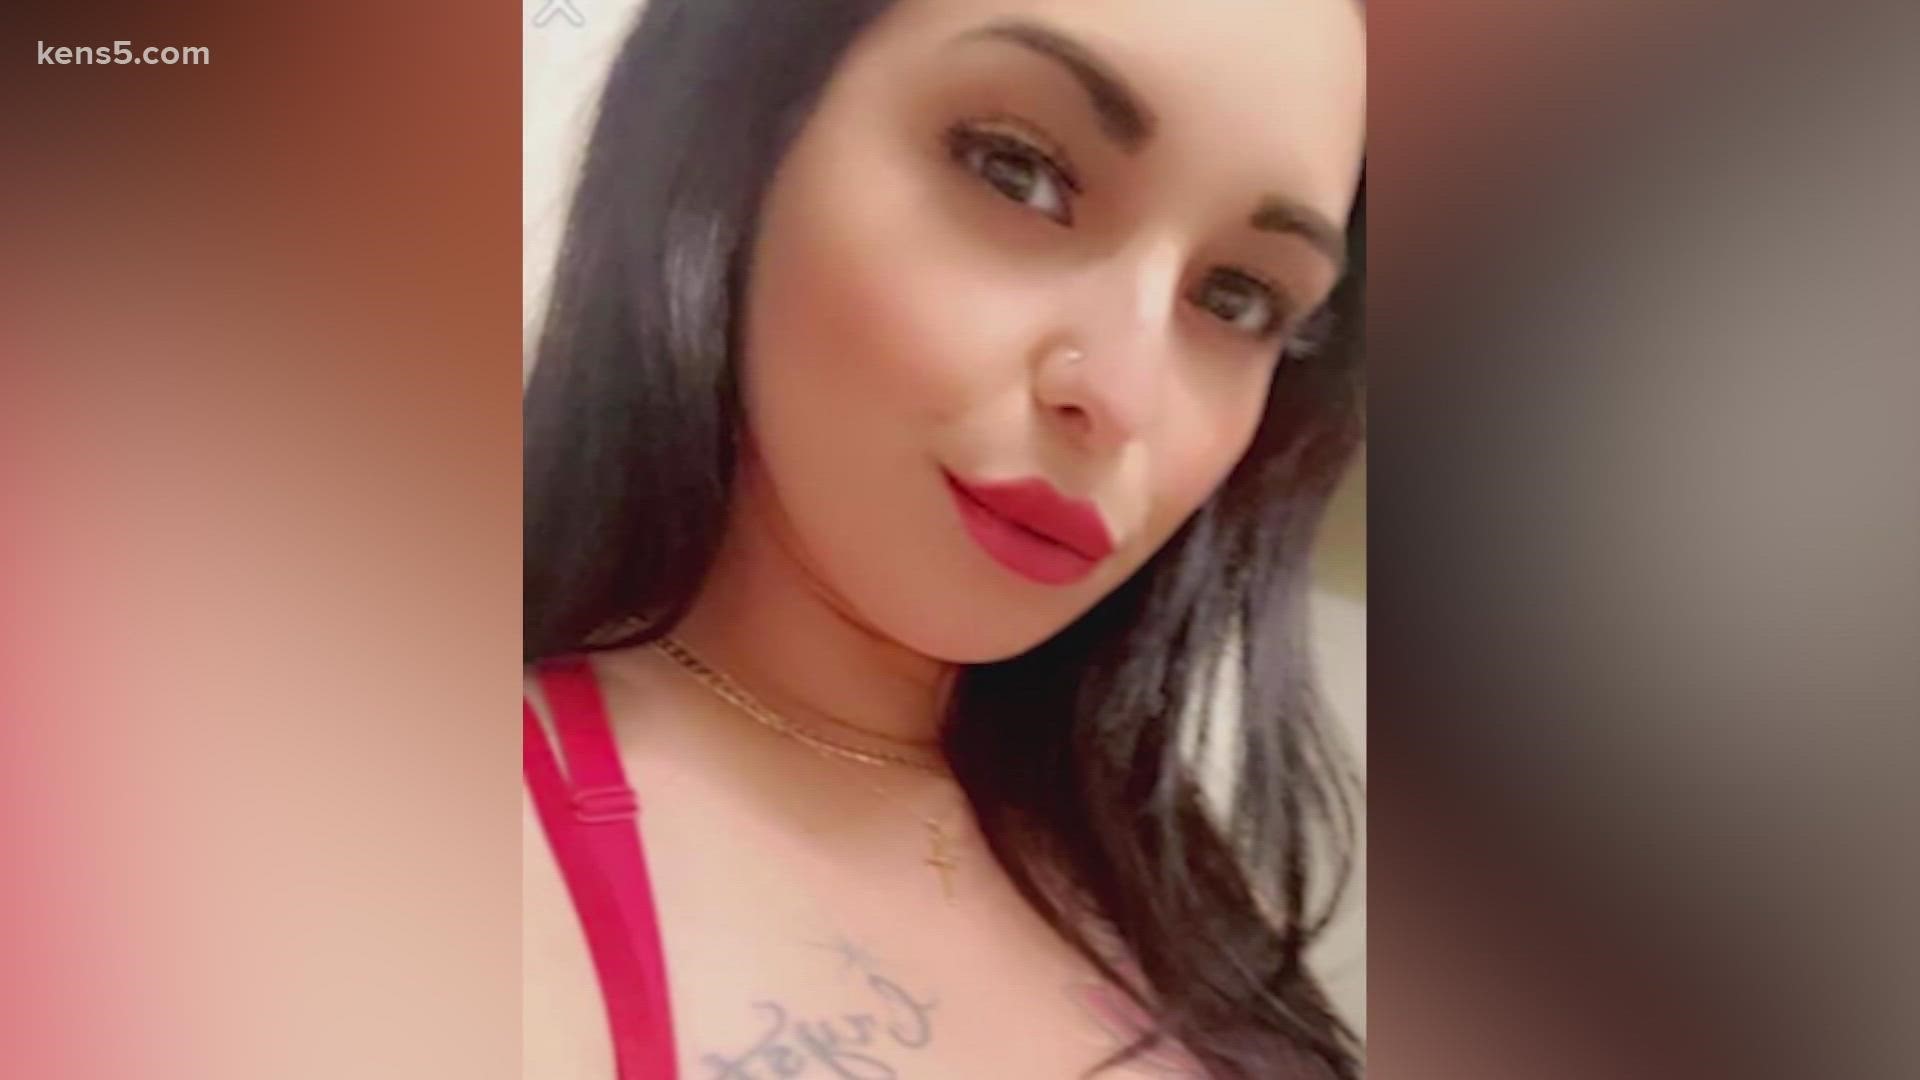 A San Antonio woman was missing from her residence when police came by to check on her, but they found evidence of a bloody crime.